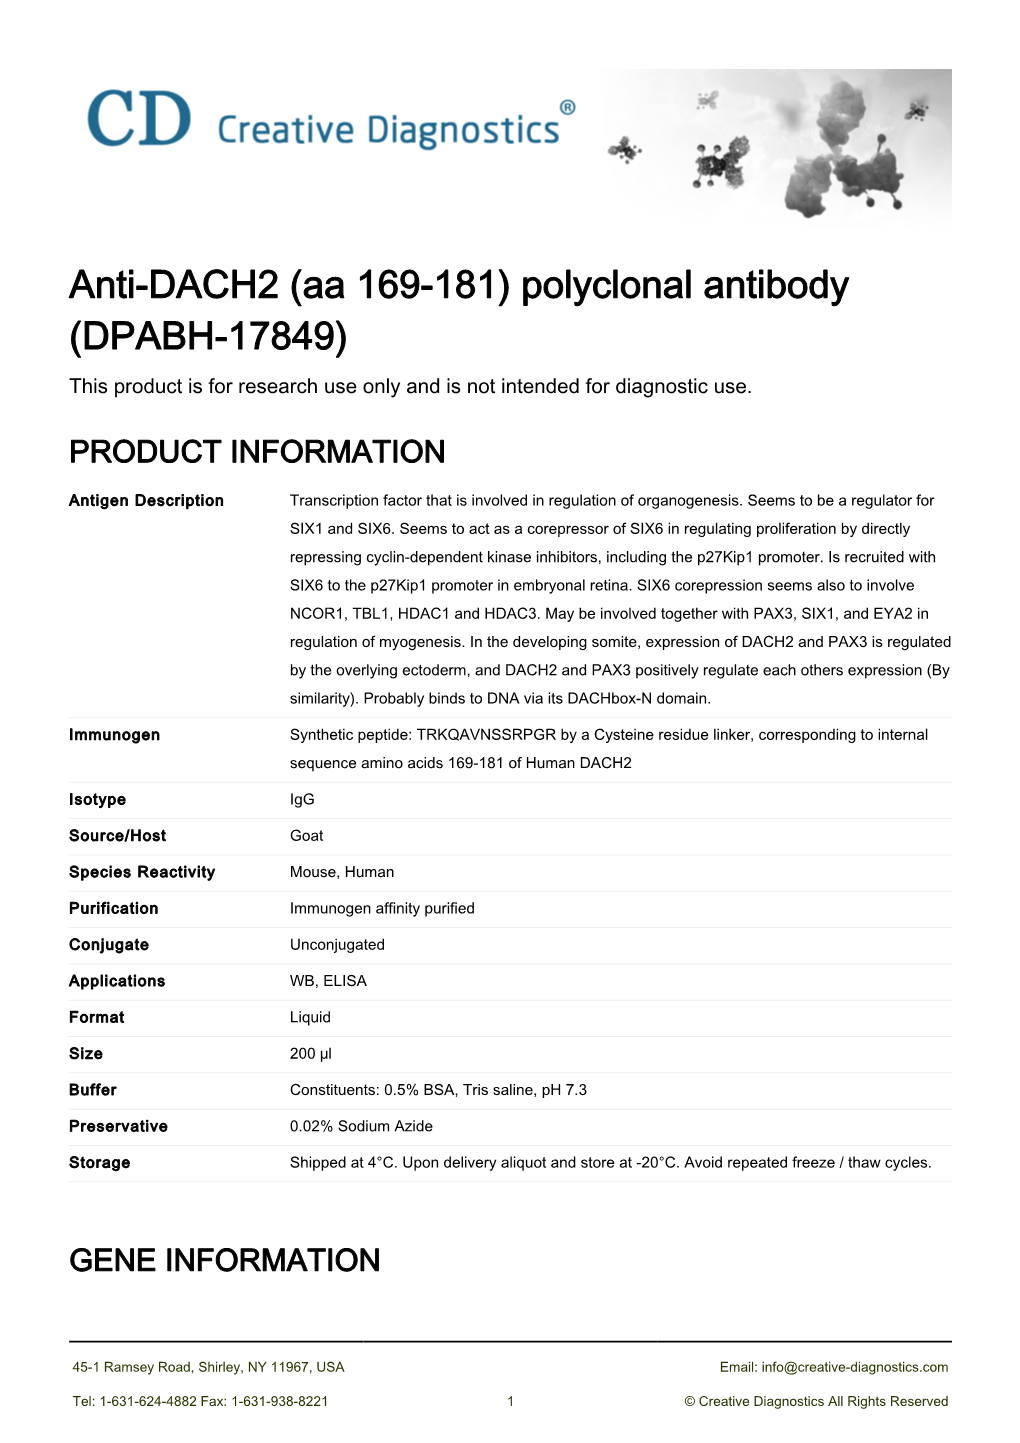 Anti-DACH2 (Aa 169-181) Polyclonal Antibody (DPABH-17849) This Product Is for Research Use Only and Is Not Intended for Diagnostic Use